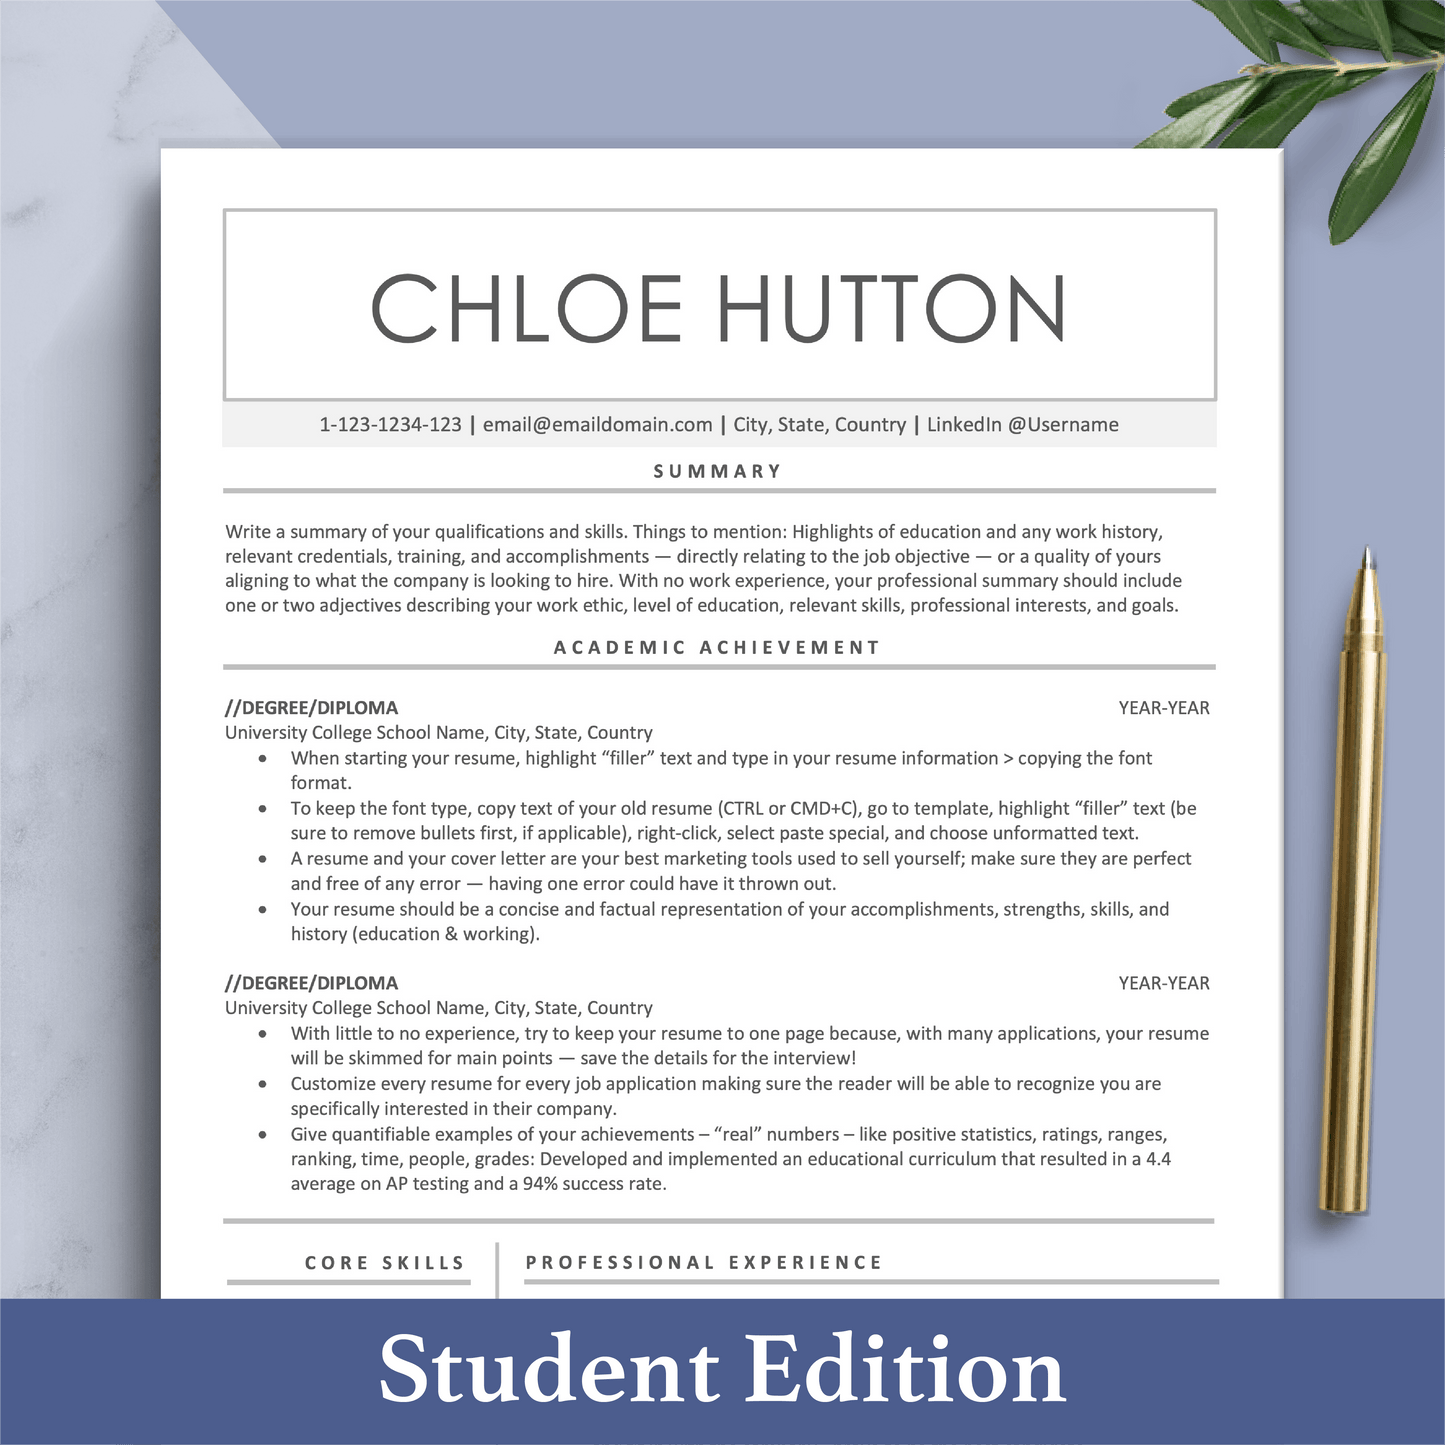 The Art of Resume Template | Modern Student Resume CV Template Design for New Graduate, Fresher, College Grad, High School, No Experience, New Job